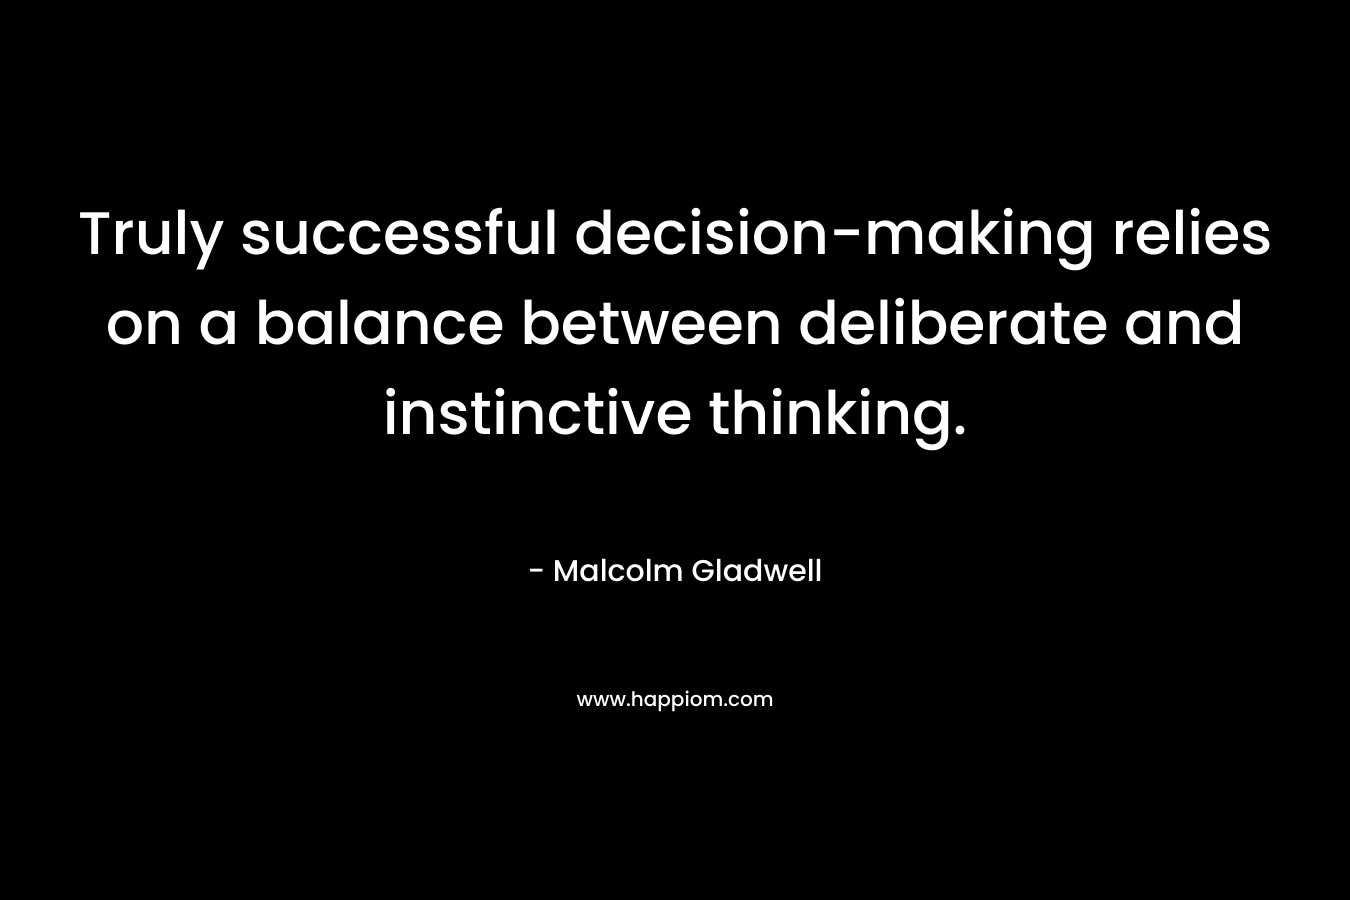 Truly successful decision-making relies on a balance between deliberate and instinctive thinking. – Malcolm Gladwell